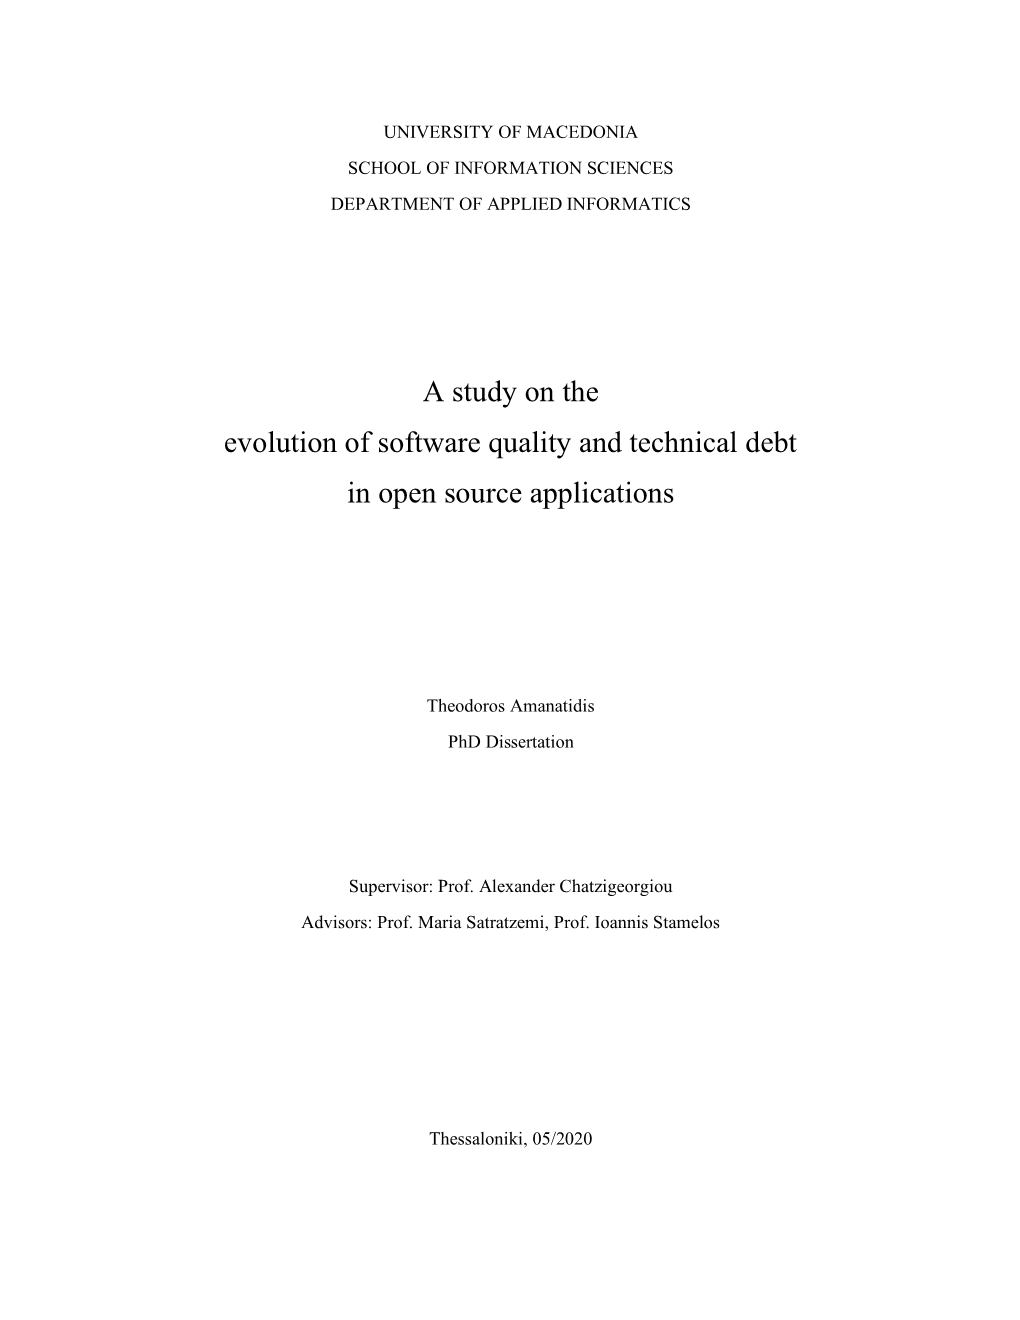 A Study on the Evolution of Software Quality and Technical Debt in Open Source Applications